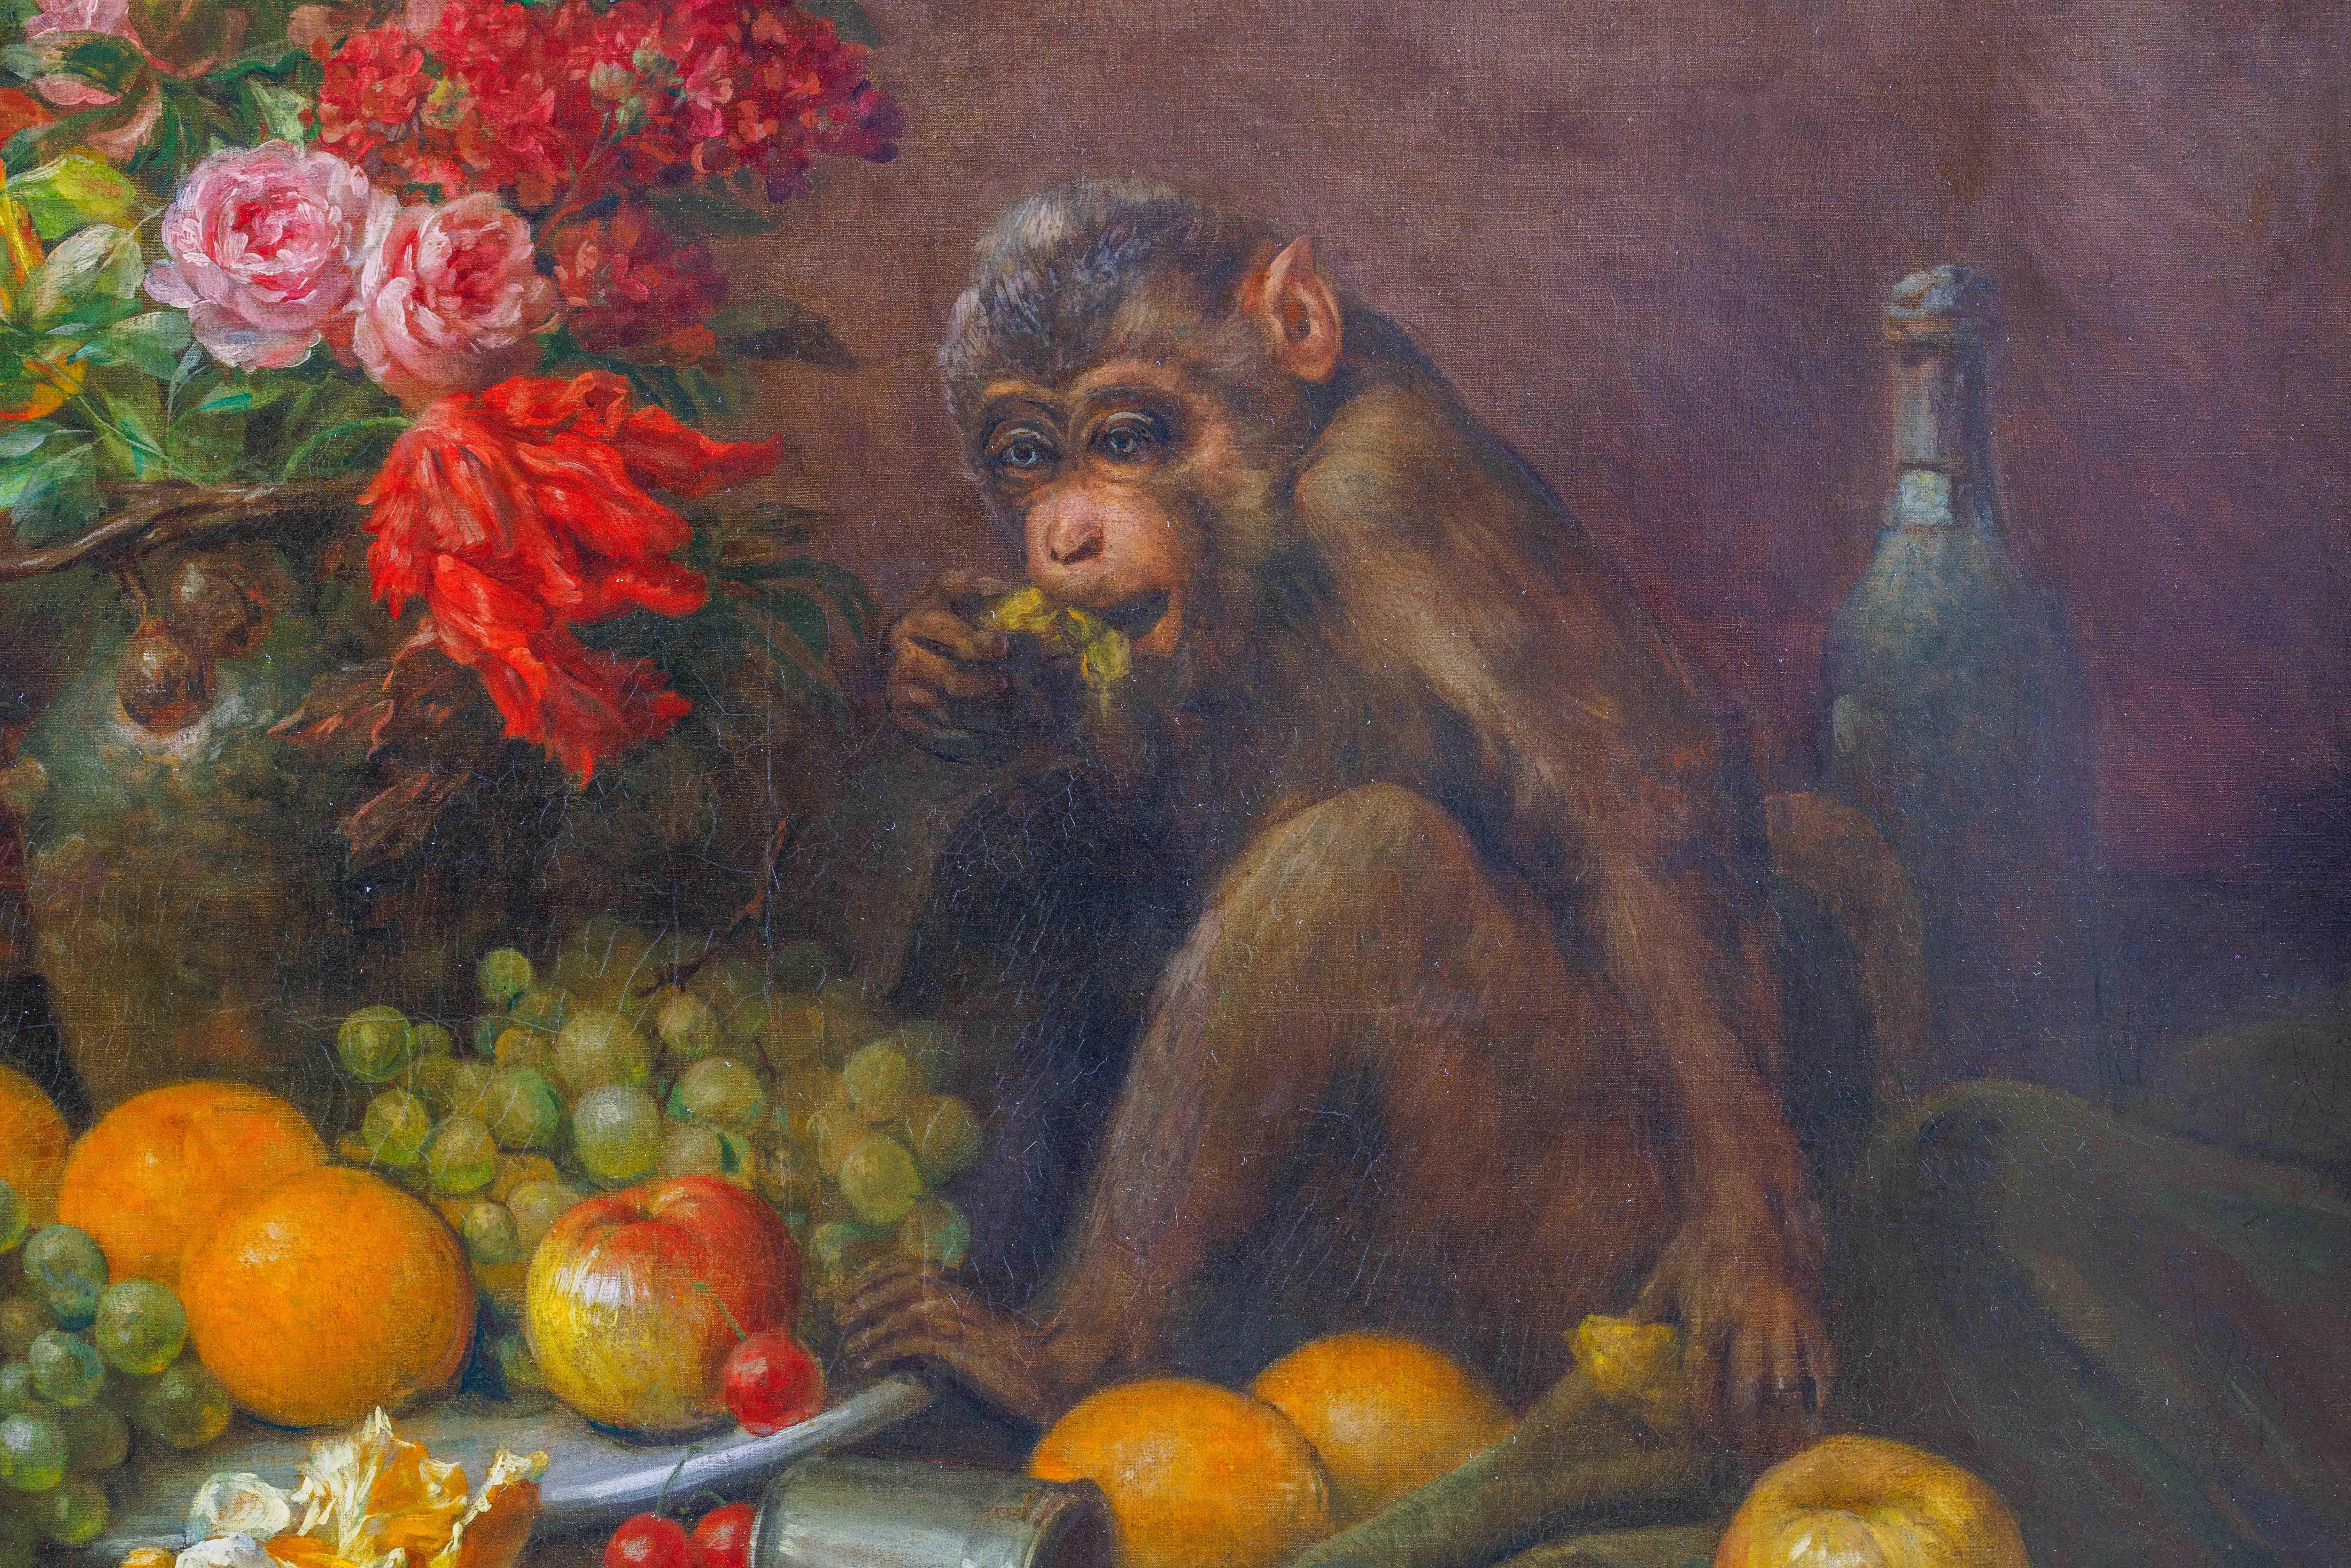 Edmond Louis Maire (French, 1862-1914) A Monkey Still Life Painting, 1904 For Sale 4